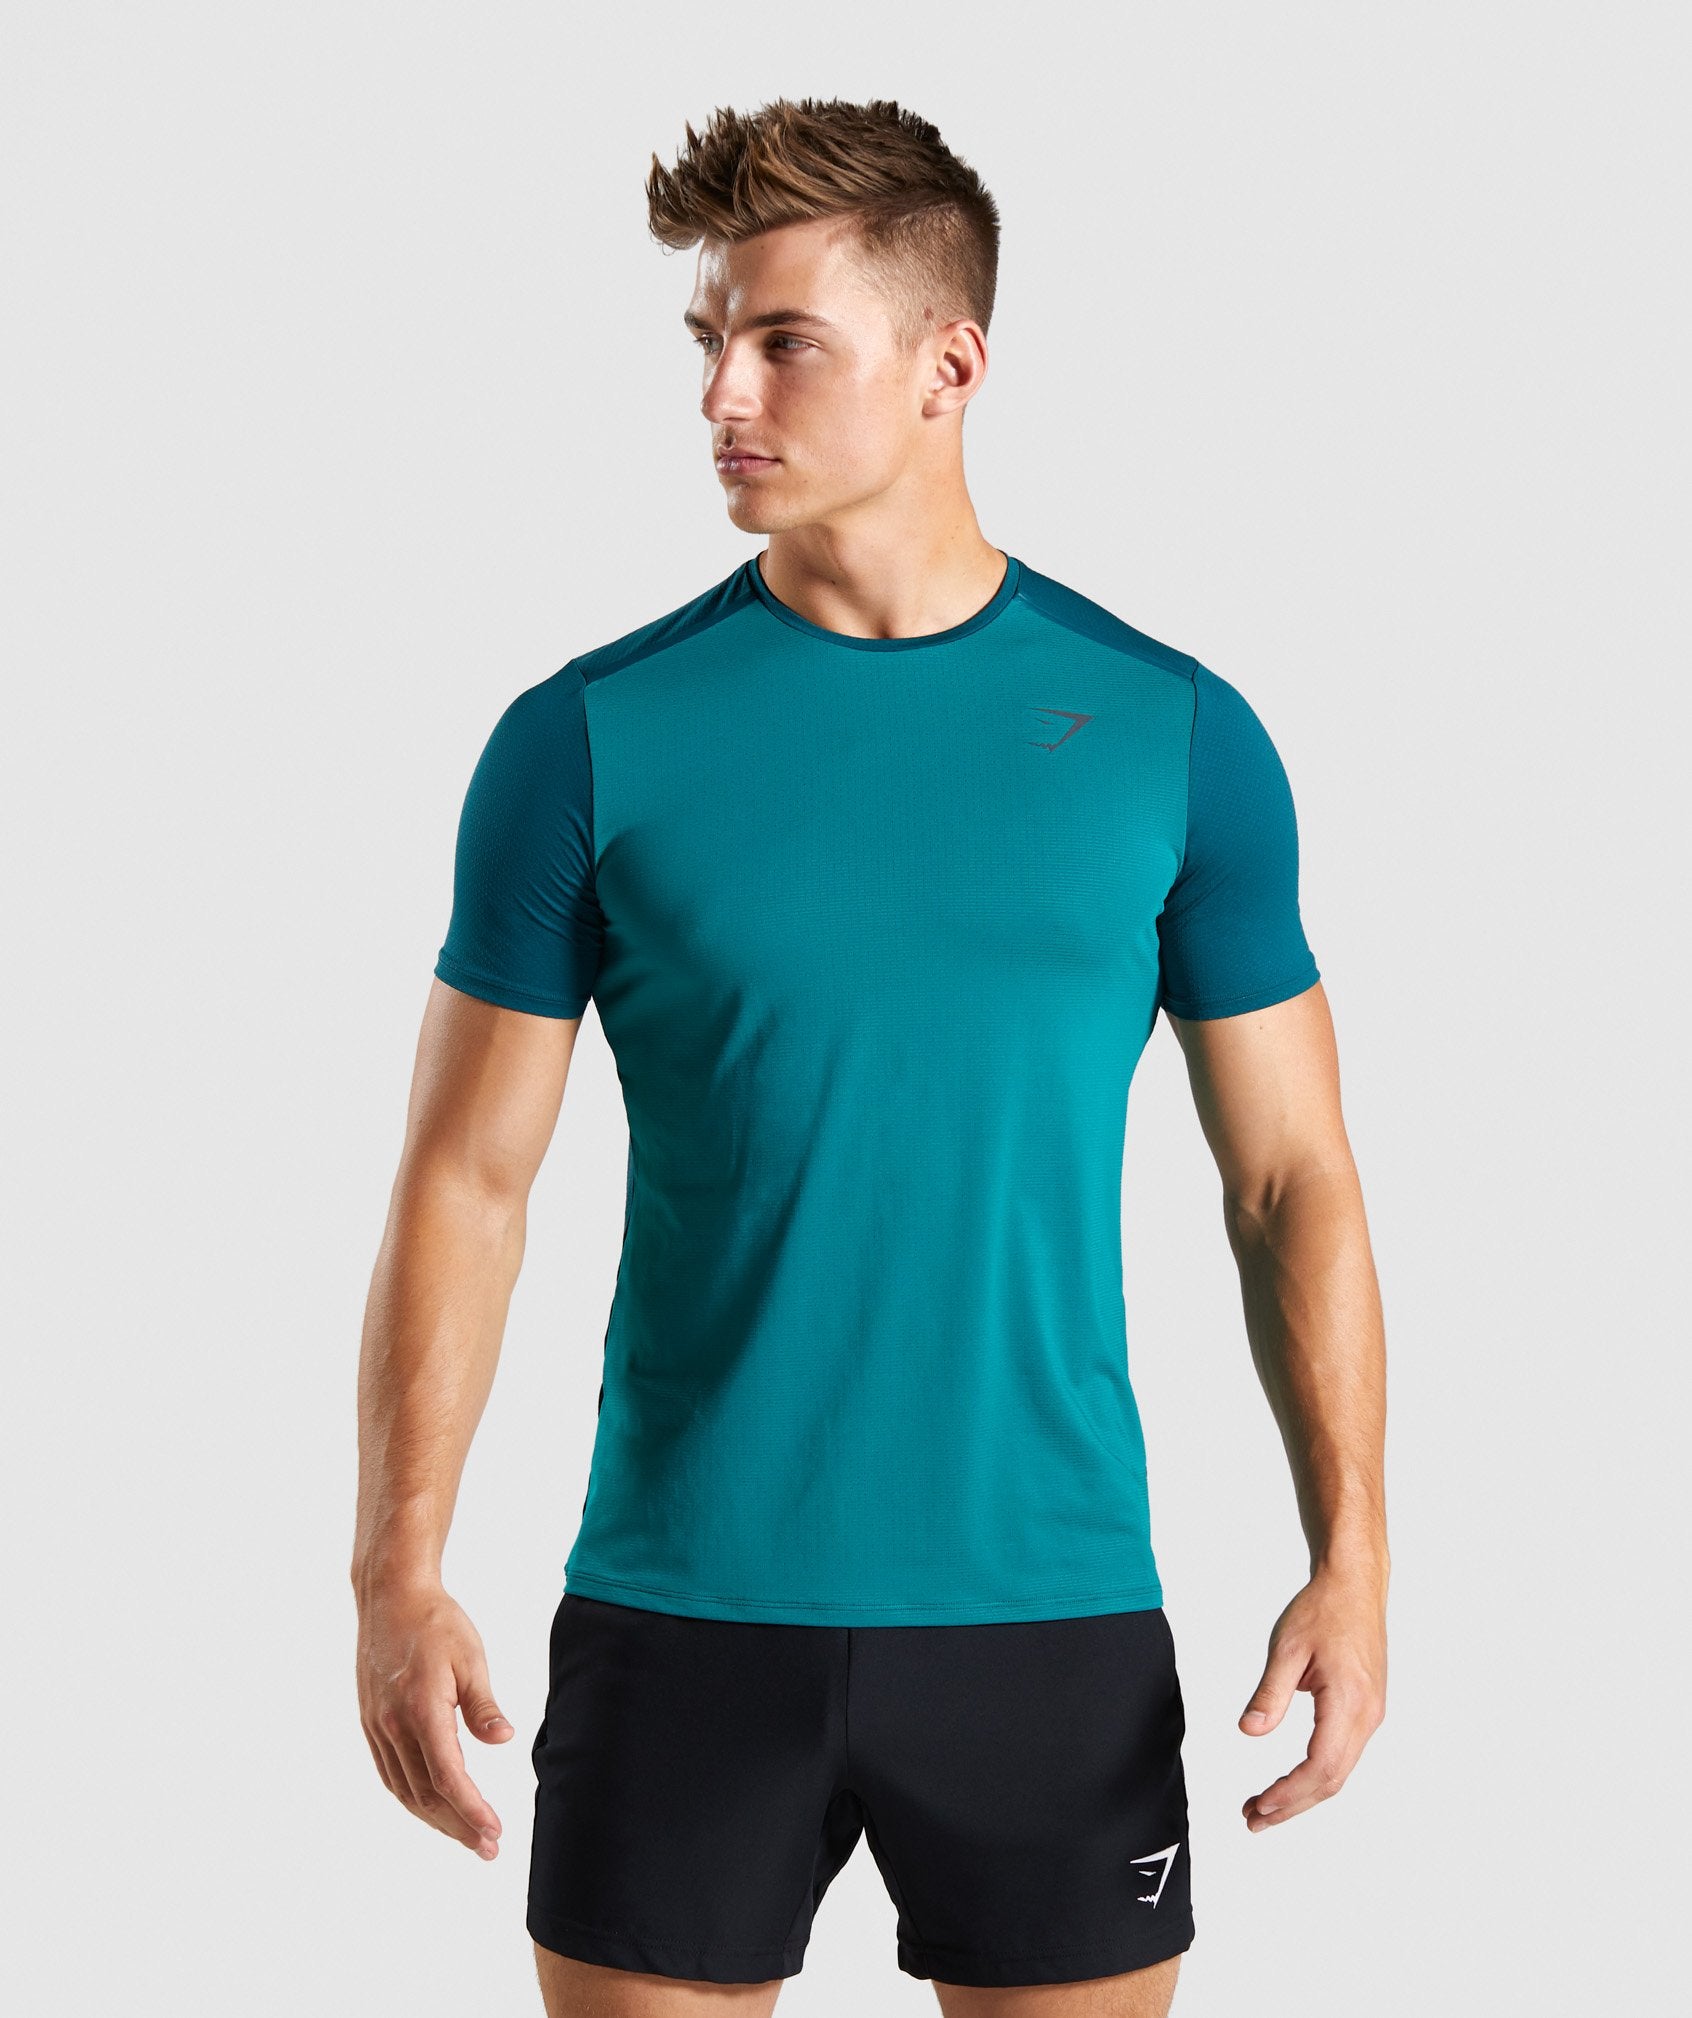 Speed T-Shirt in Green - view 1